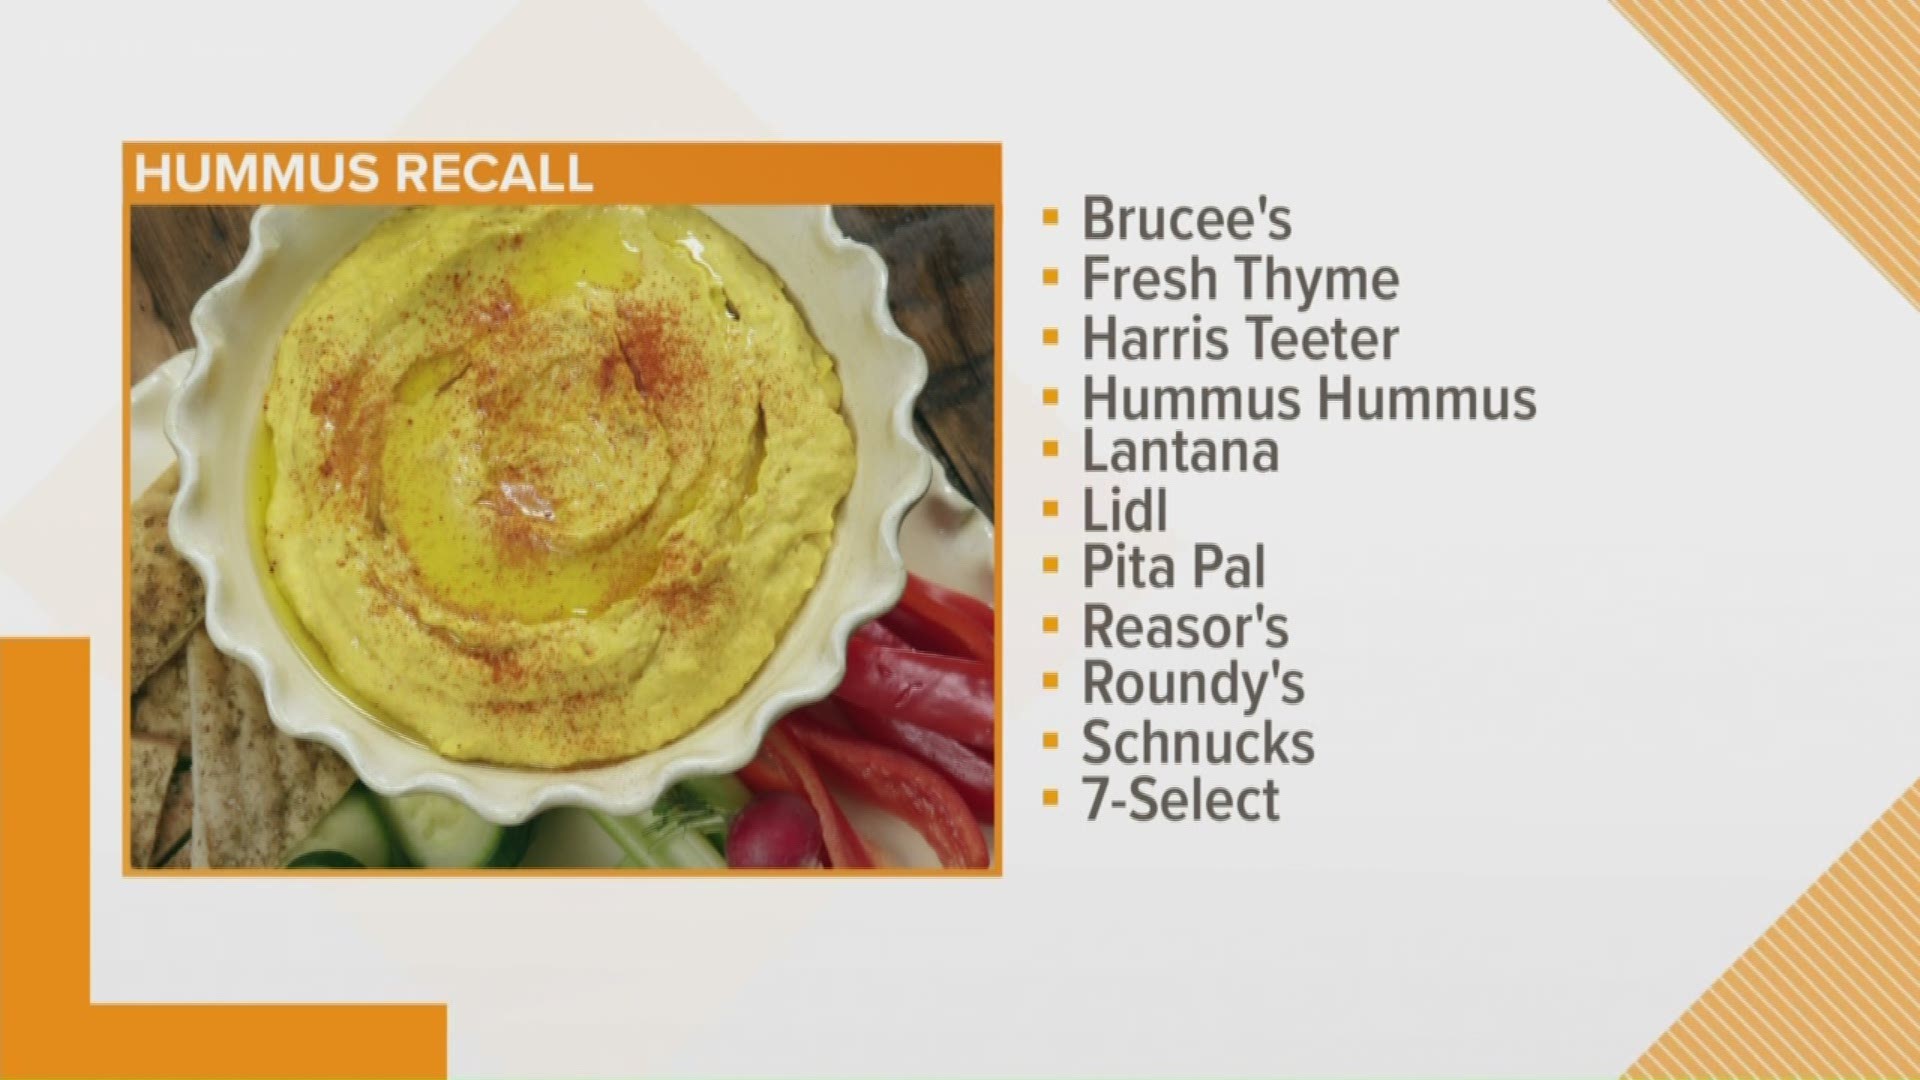 Check your pantry! Pita Pal Foods out of Houston has triggered a voluntary recall of multiple hummus products due to concerns of Listeria monocytogenes.